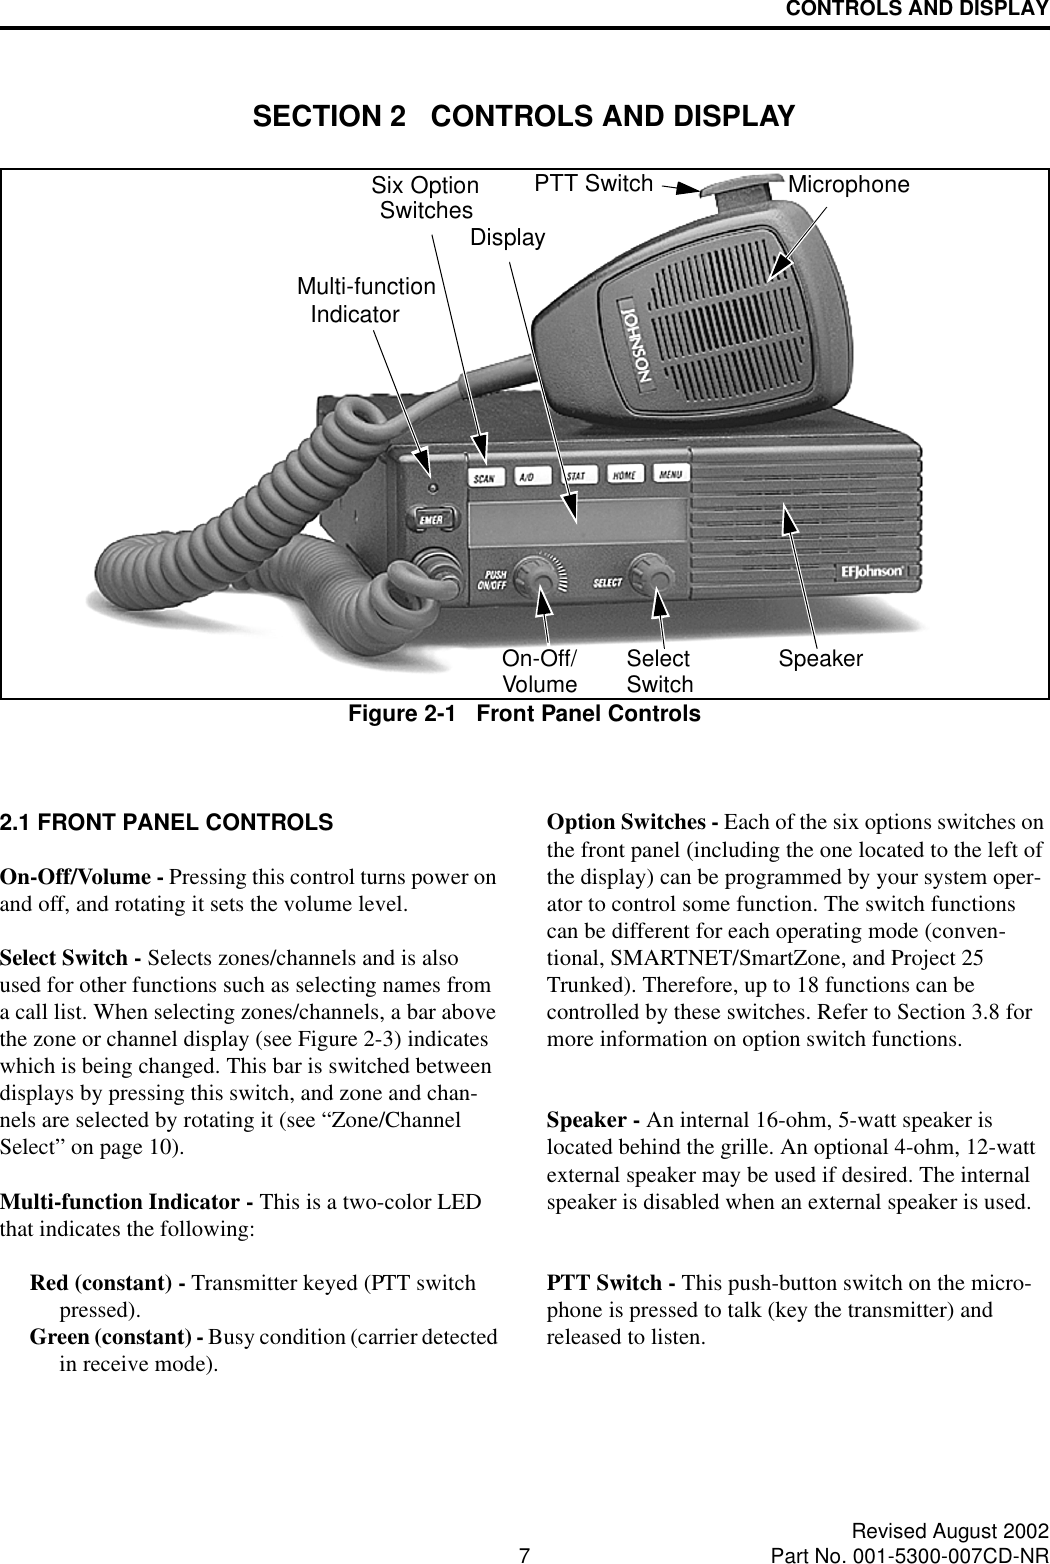 CONTROLS AND DISPLAY7Revised August 2002Part No. 001-5300-007CD-NRSECTION 2   CONTROLS AND DISPLAYFigure 2-1   Front Panel ControlsSix OptionSwitchesDisplayMicrophonePTT SwitchSpeakerSelectSwitchOn-Off/VolumeMulti-functionIndicator2.1 FRONT PANEL CONTROLSOn-Off/Volume - Pressing this control turns power on and off, and rotating it sets the volume level.Select Switch - Selects zones/channels and is also used for other functions such as selecting names from a call list. When selecting zones/channels, a bar above the zone or channel display (see Figure 2-3) indicates which is being changed. This bar is switched between displays by pressing this switch, and zone and chan-nels are selected by rotating it (see “Zone/Channel Select” on page 10). Multi-function Indicator - This is a two-color LED that indicates the following:Red (constant) - Transmitter keyed (PTT switch pressed).Green (constant) - Busy condition (carrier detected in receive mode).Option Switches - Each of the six options switches on the front panel (including the one located to the left of the display) can be programmed by your system oper-ator to control some function. The switch functions can be different for each operating mode (conven-tional, SMARTNET/SmartZone, and Project 25 Trunked). Therefore, up to 18 functions can be controlled by these switches. Refer to Section 3.8 for more information on option switch functions.Speaker - An internal 16-ohm, 5-watt speaker is located behind the grille. An optional 4-ohm, 12-watt external speaker may be used if desired. The internal speaker is disabled when an external speaker is used.PTT Switch - This push-button switch on the micro-phone is pressed to talk (key the transmitter) and released to listen.